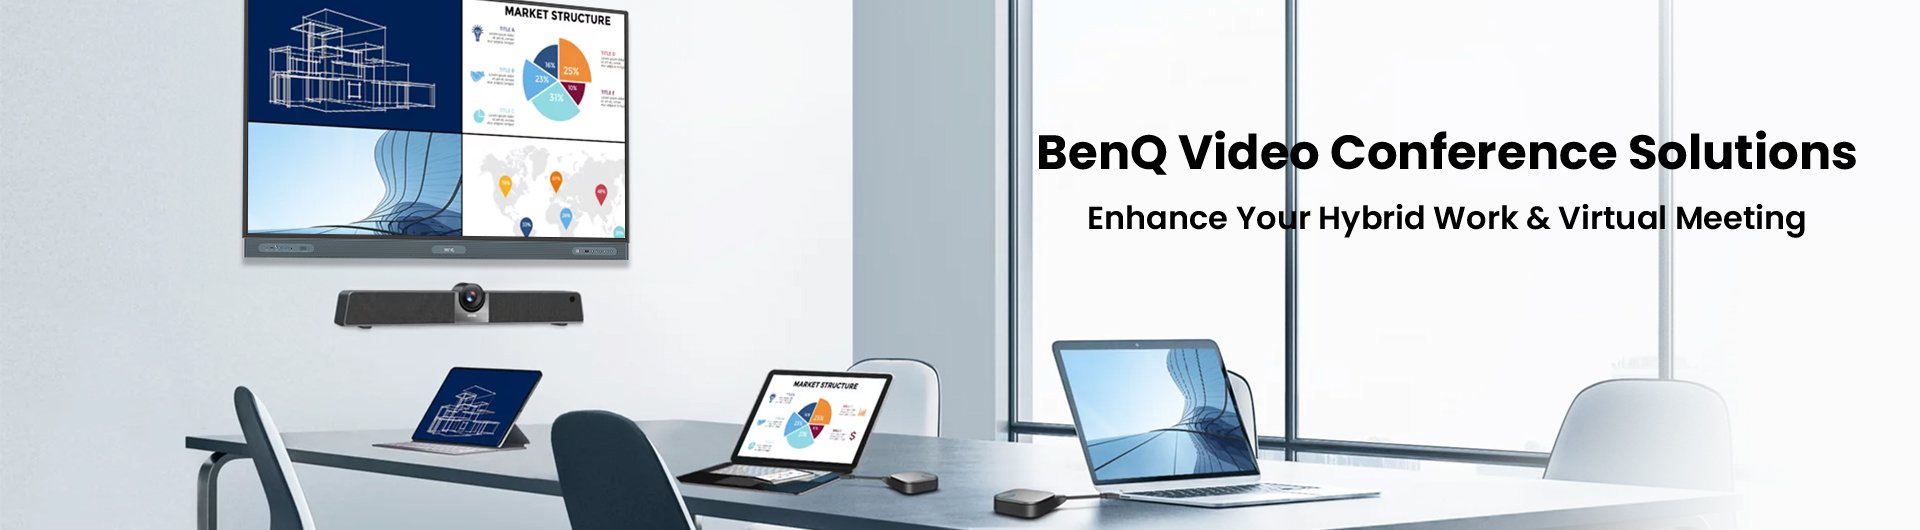 BenQ Video Conference Solution